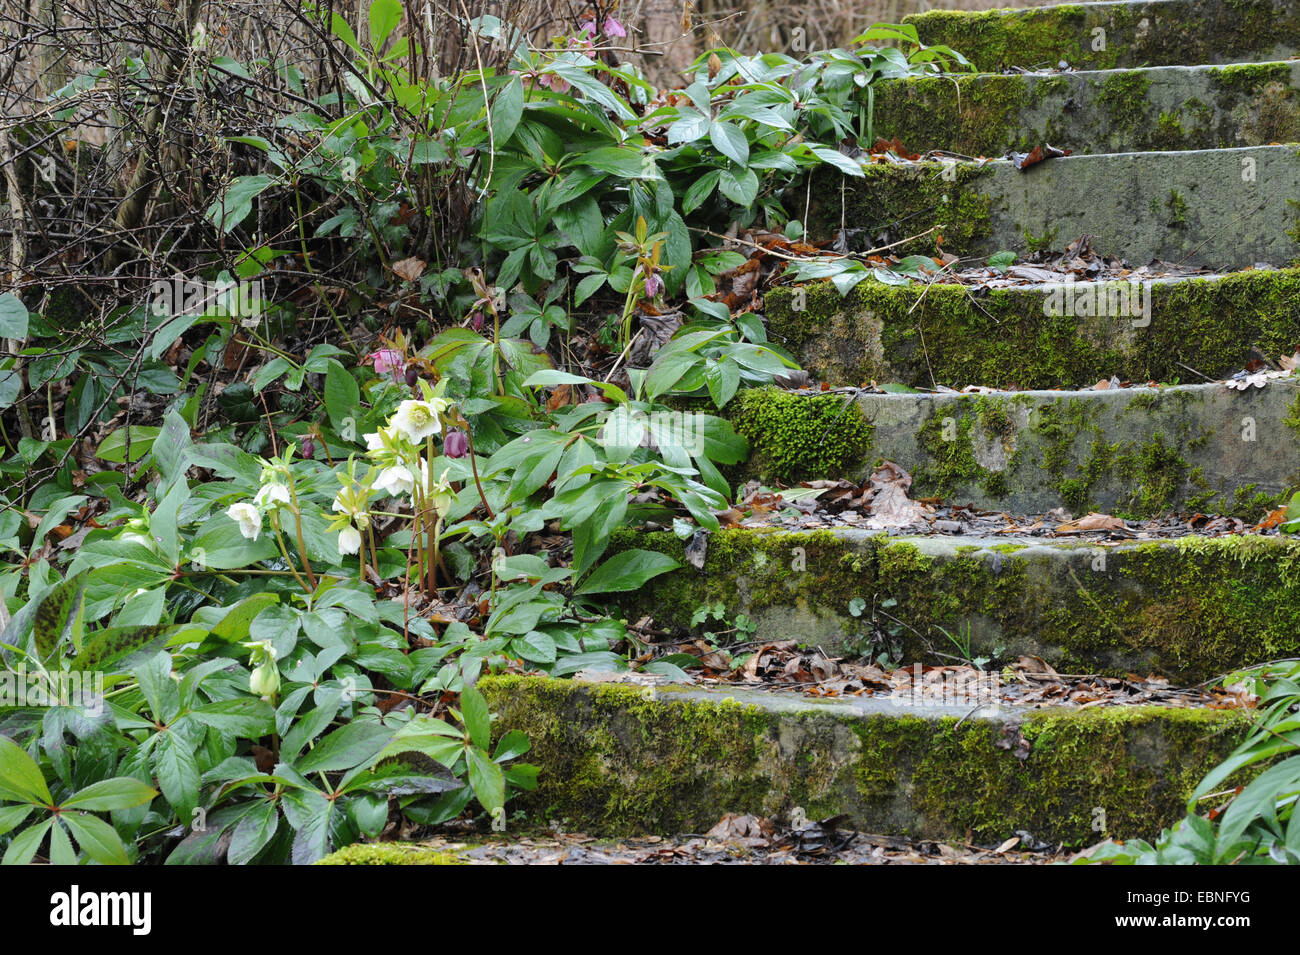 Hellebore (Helleborus spec.), blooming in a garden at mossy stairs Stock Photo